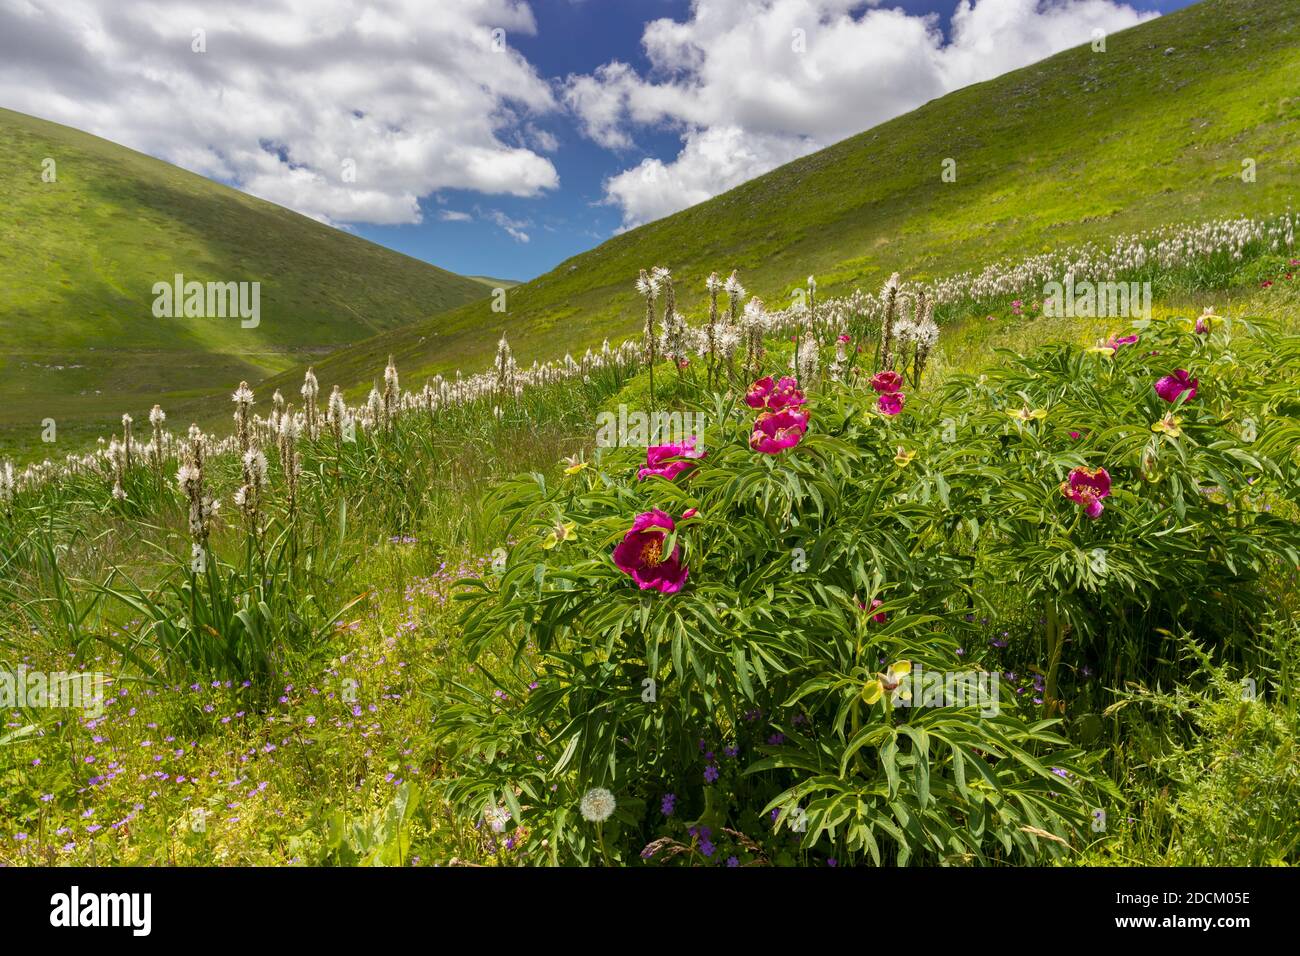 Common Peony (Paeonia officinalis), plants growing on a moutain slope, Abruzzo, Italy Stock Photo